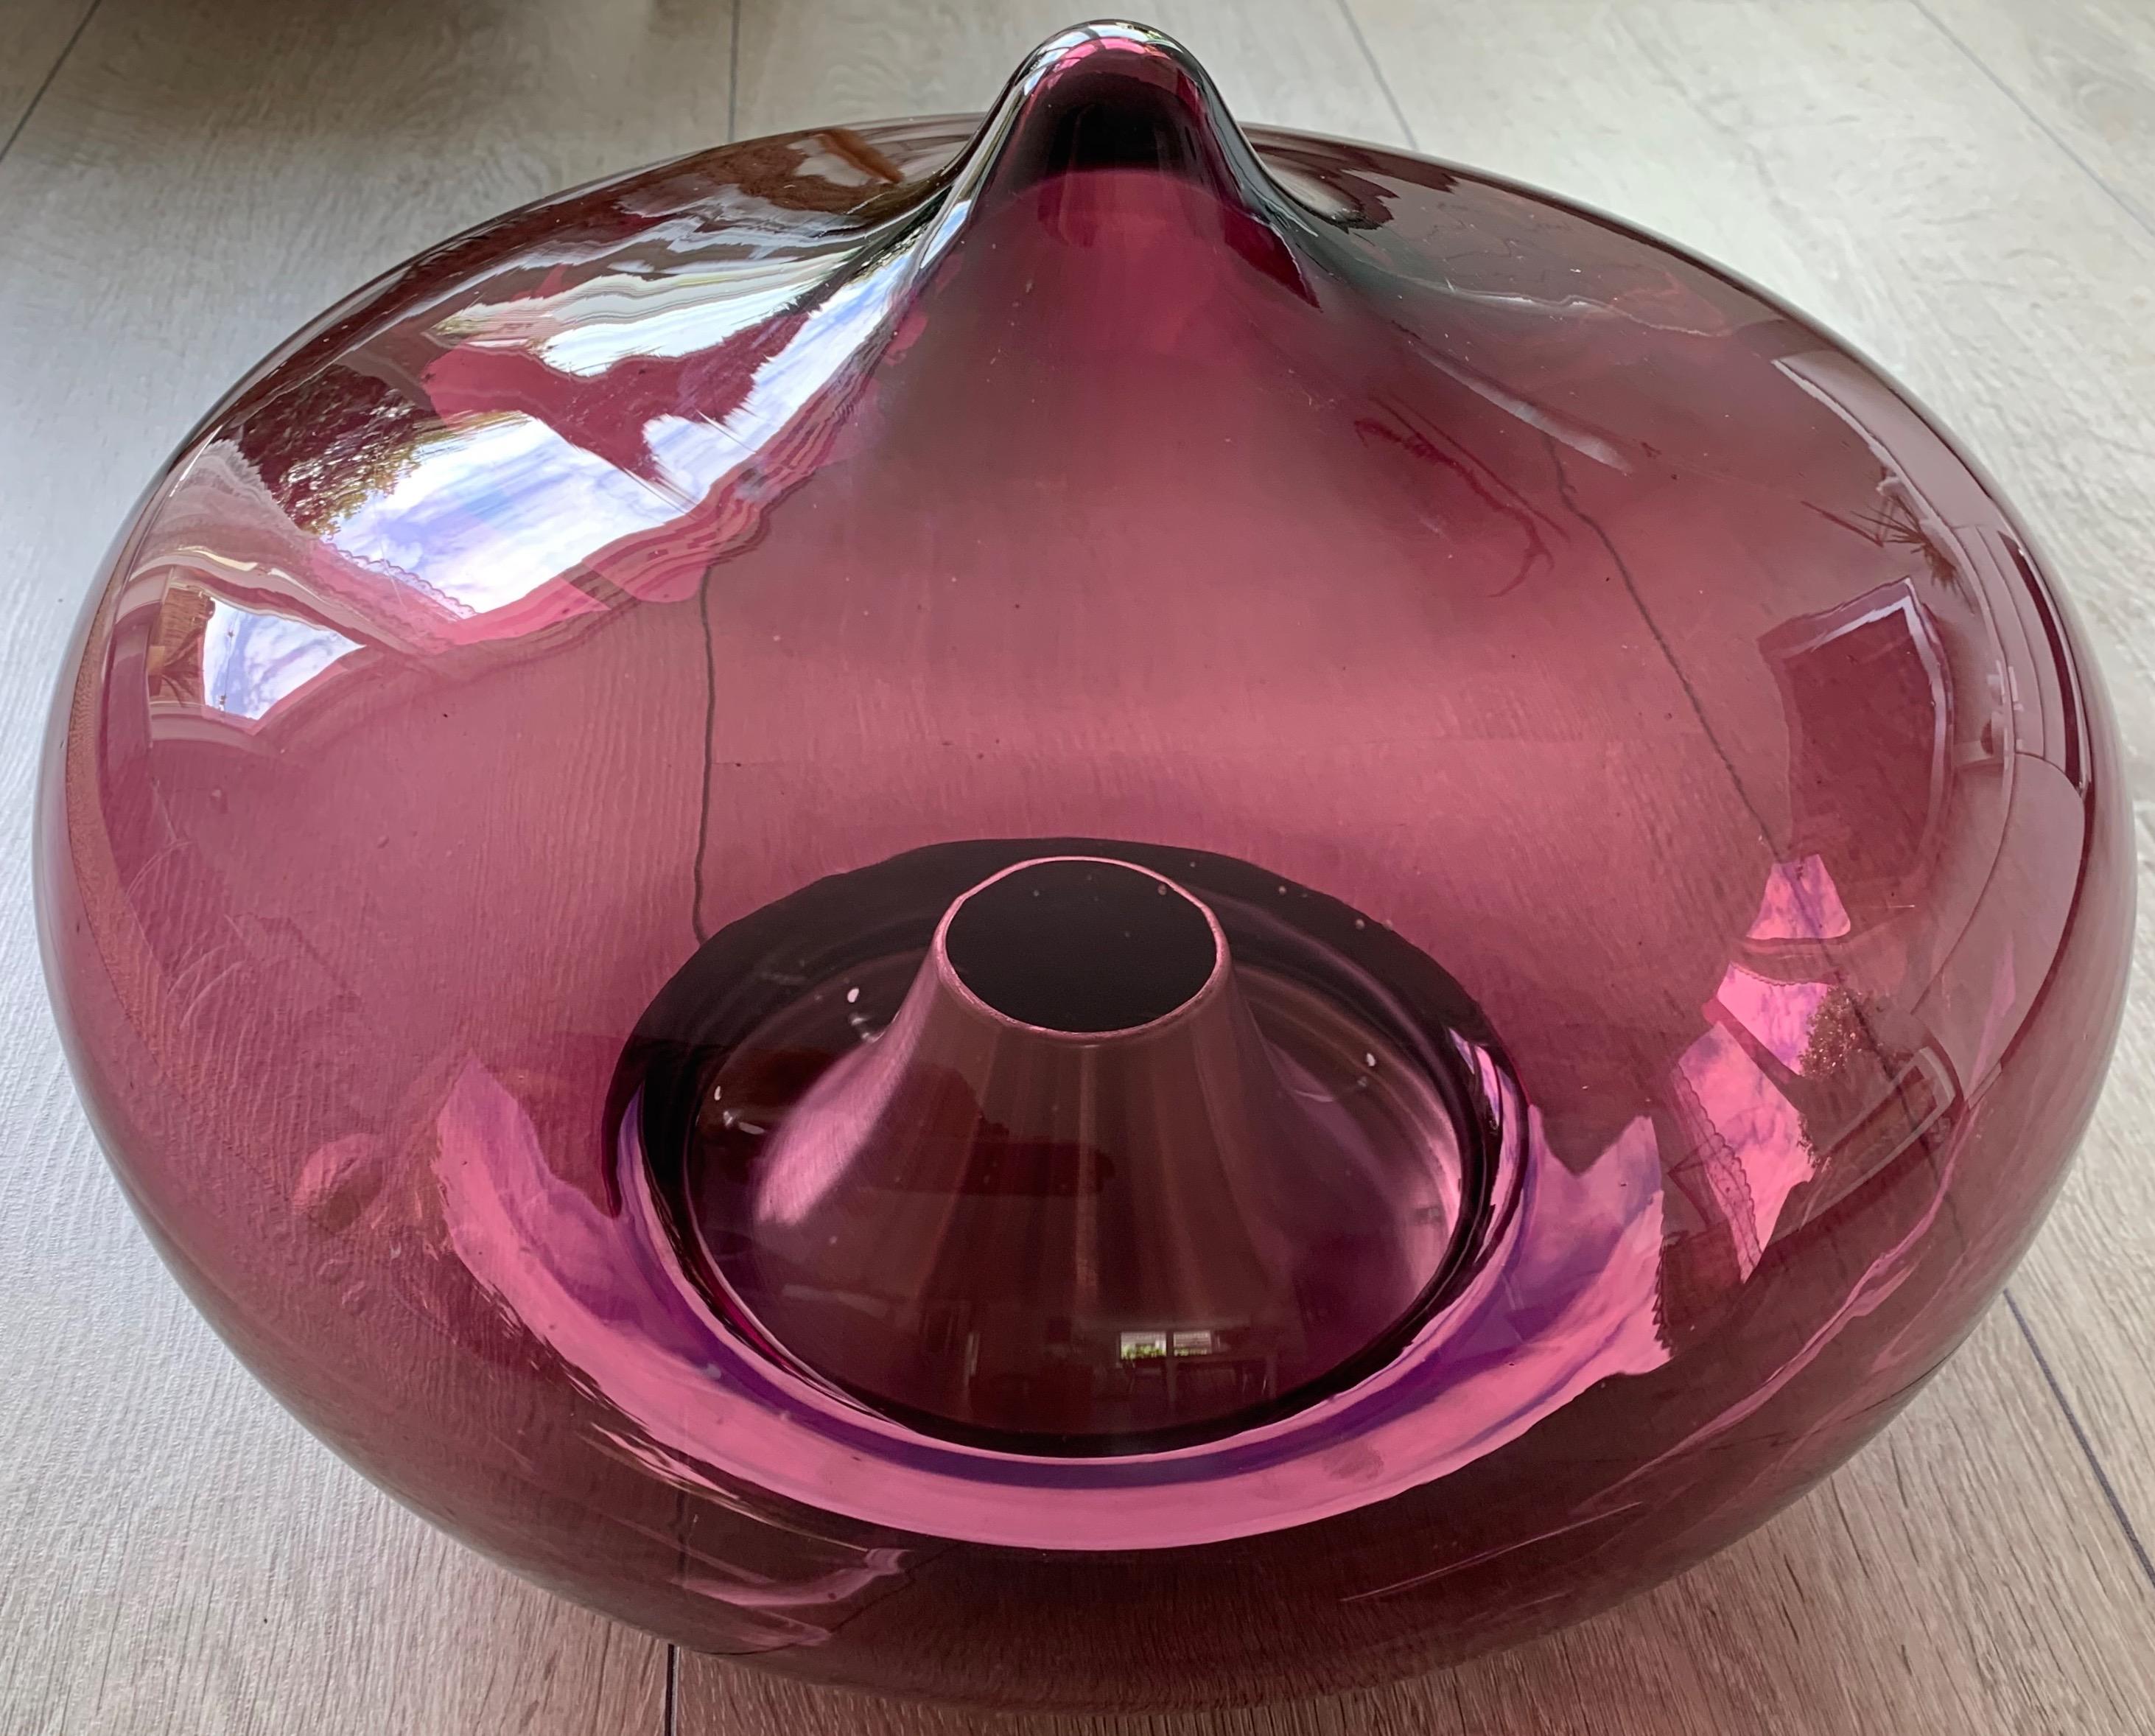 Stunning and practical size Mid-Century Modern ceiling light fixture, 1960s.

For the collectors and enthousiasts of vintage lighting we also have this rare, beautifully designed and perfectly executed, cranberry color flush mount. The exceptional